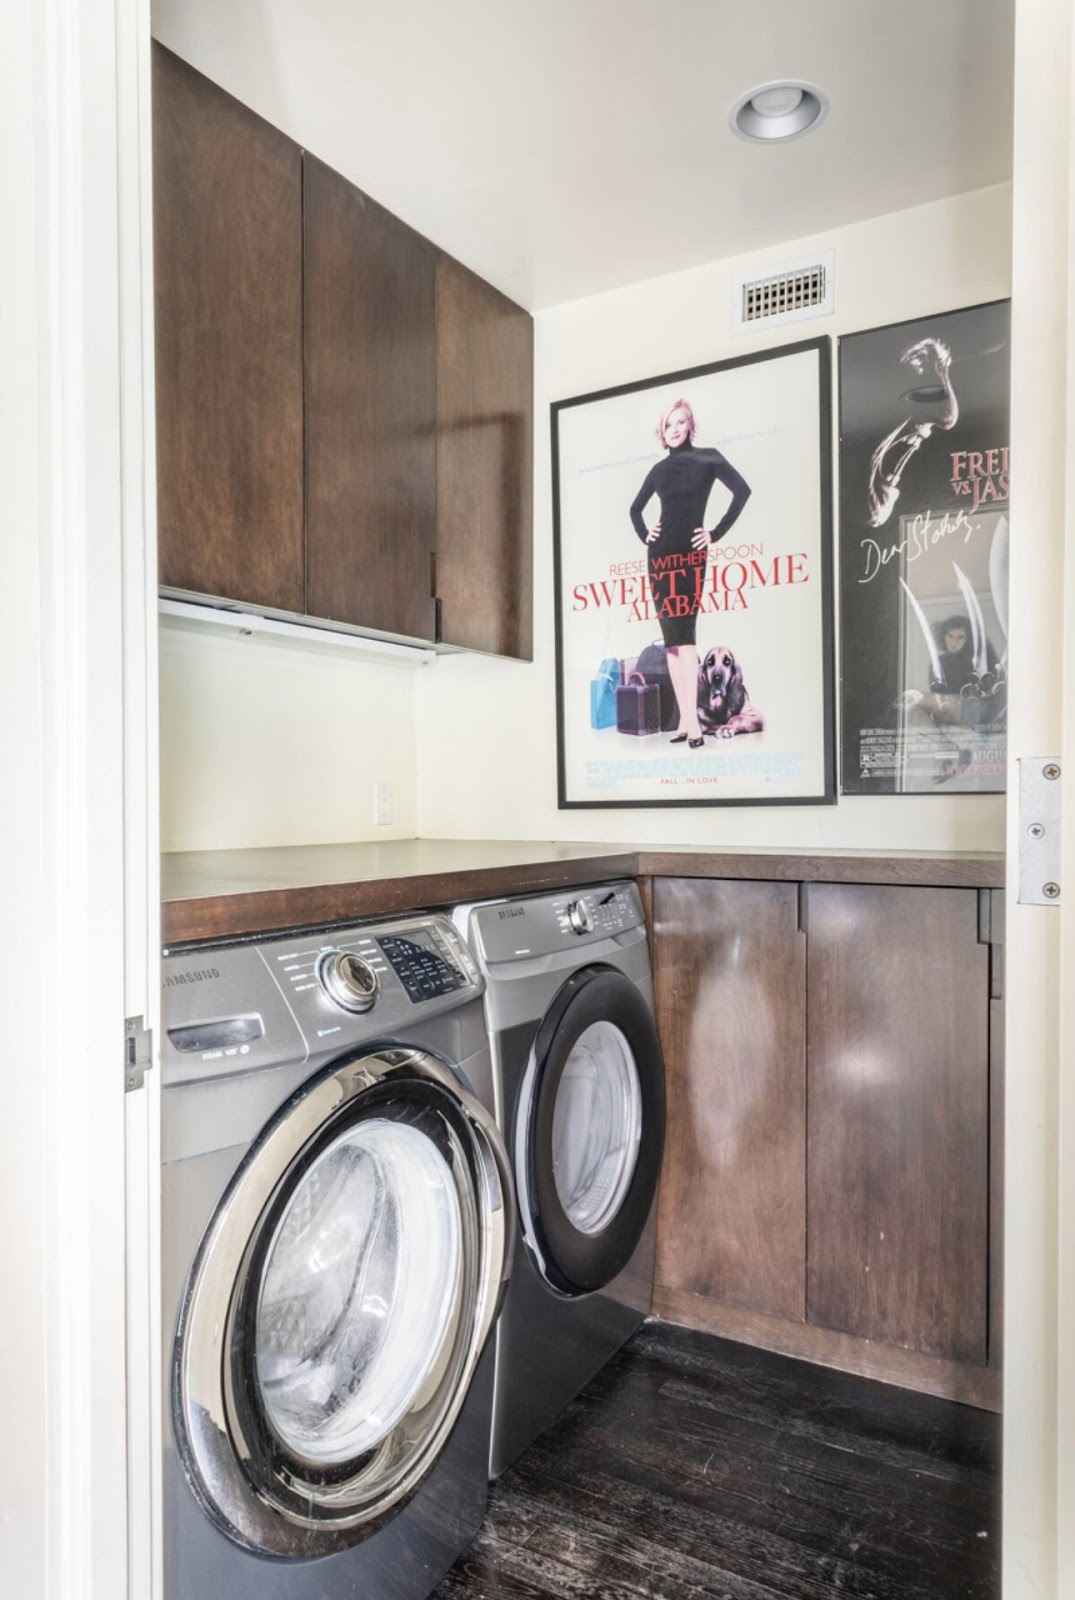 A laundry room with two machines and a poster